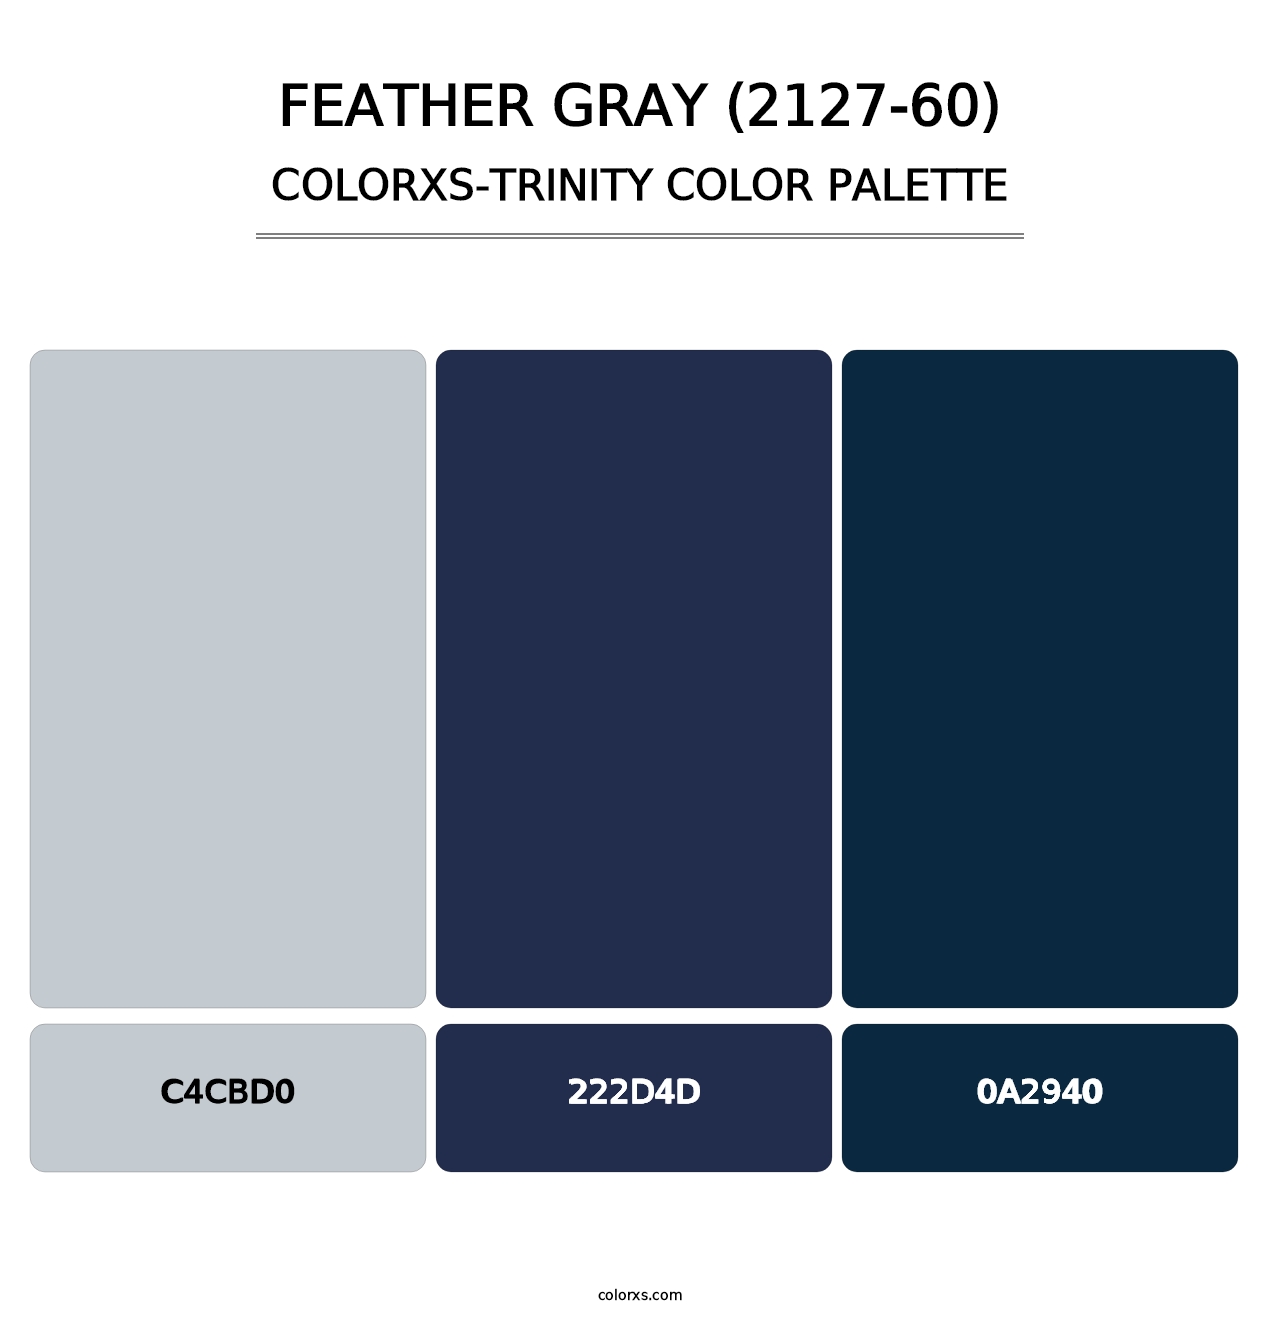 Feather Gray (2127-60) - Colorxs Trinity Palette